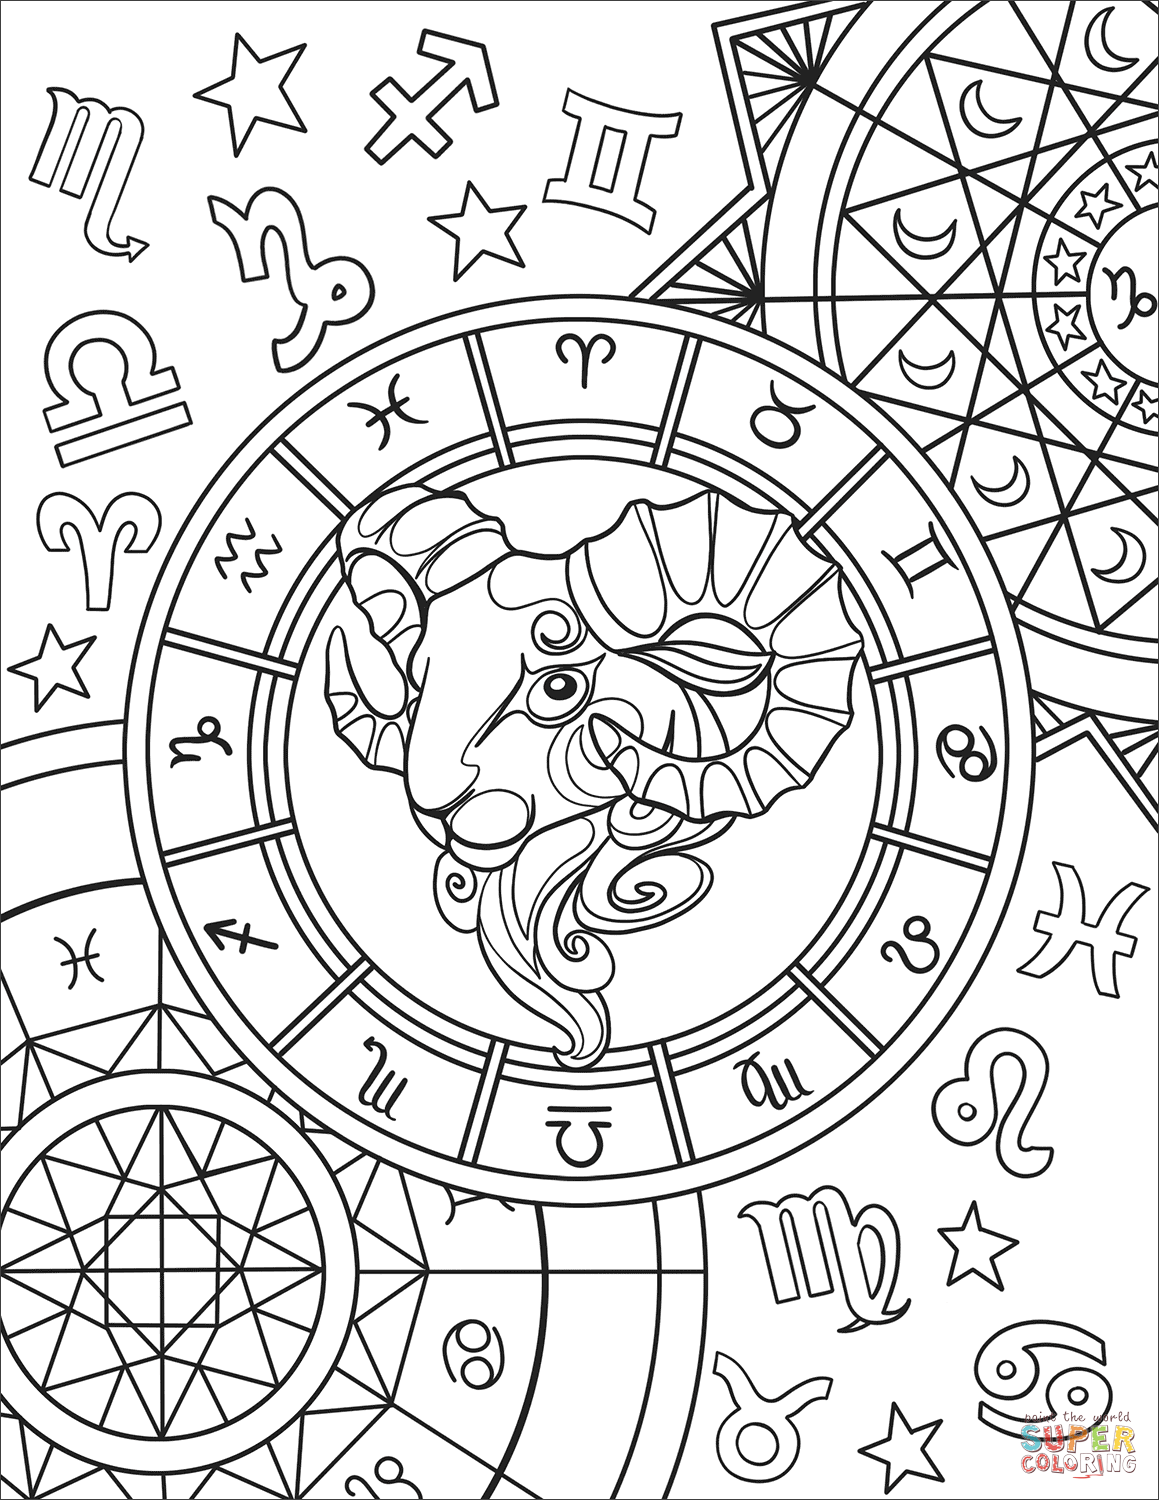 Aries Zodiac Sign coloring page | Free Printable Coloring Pages